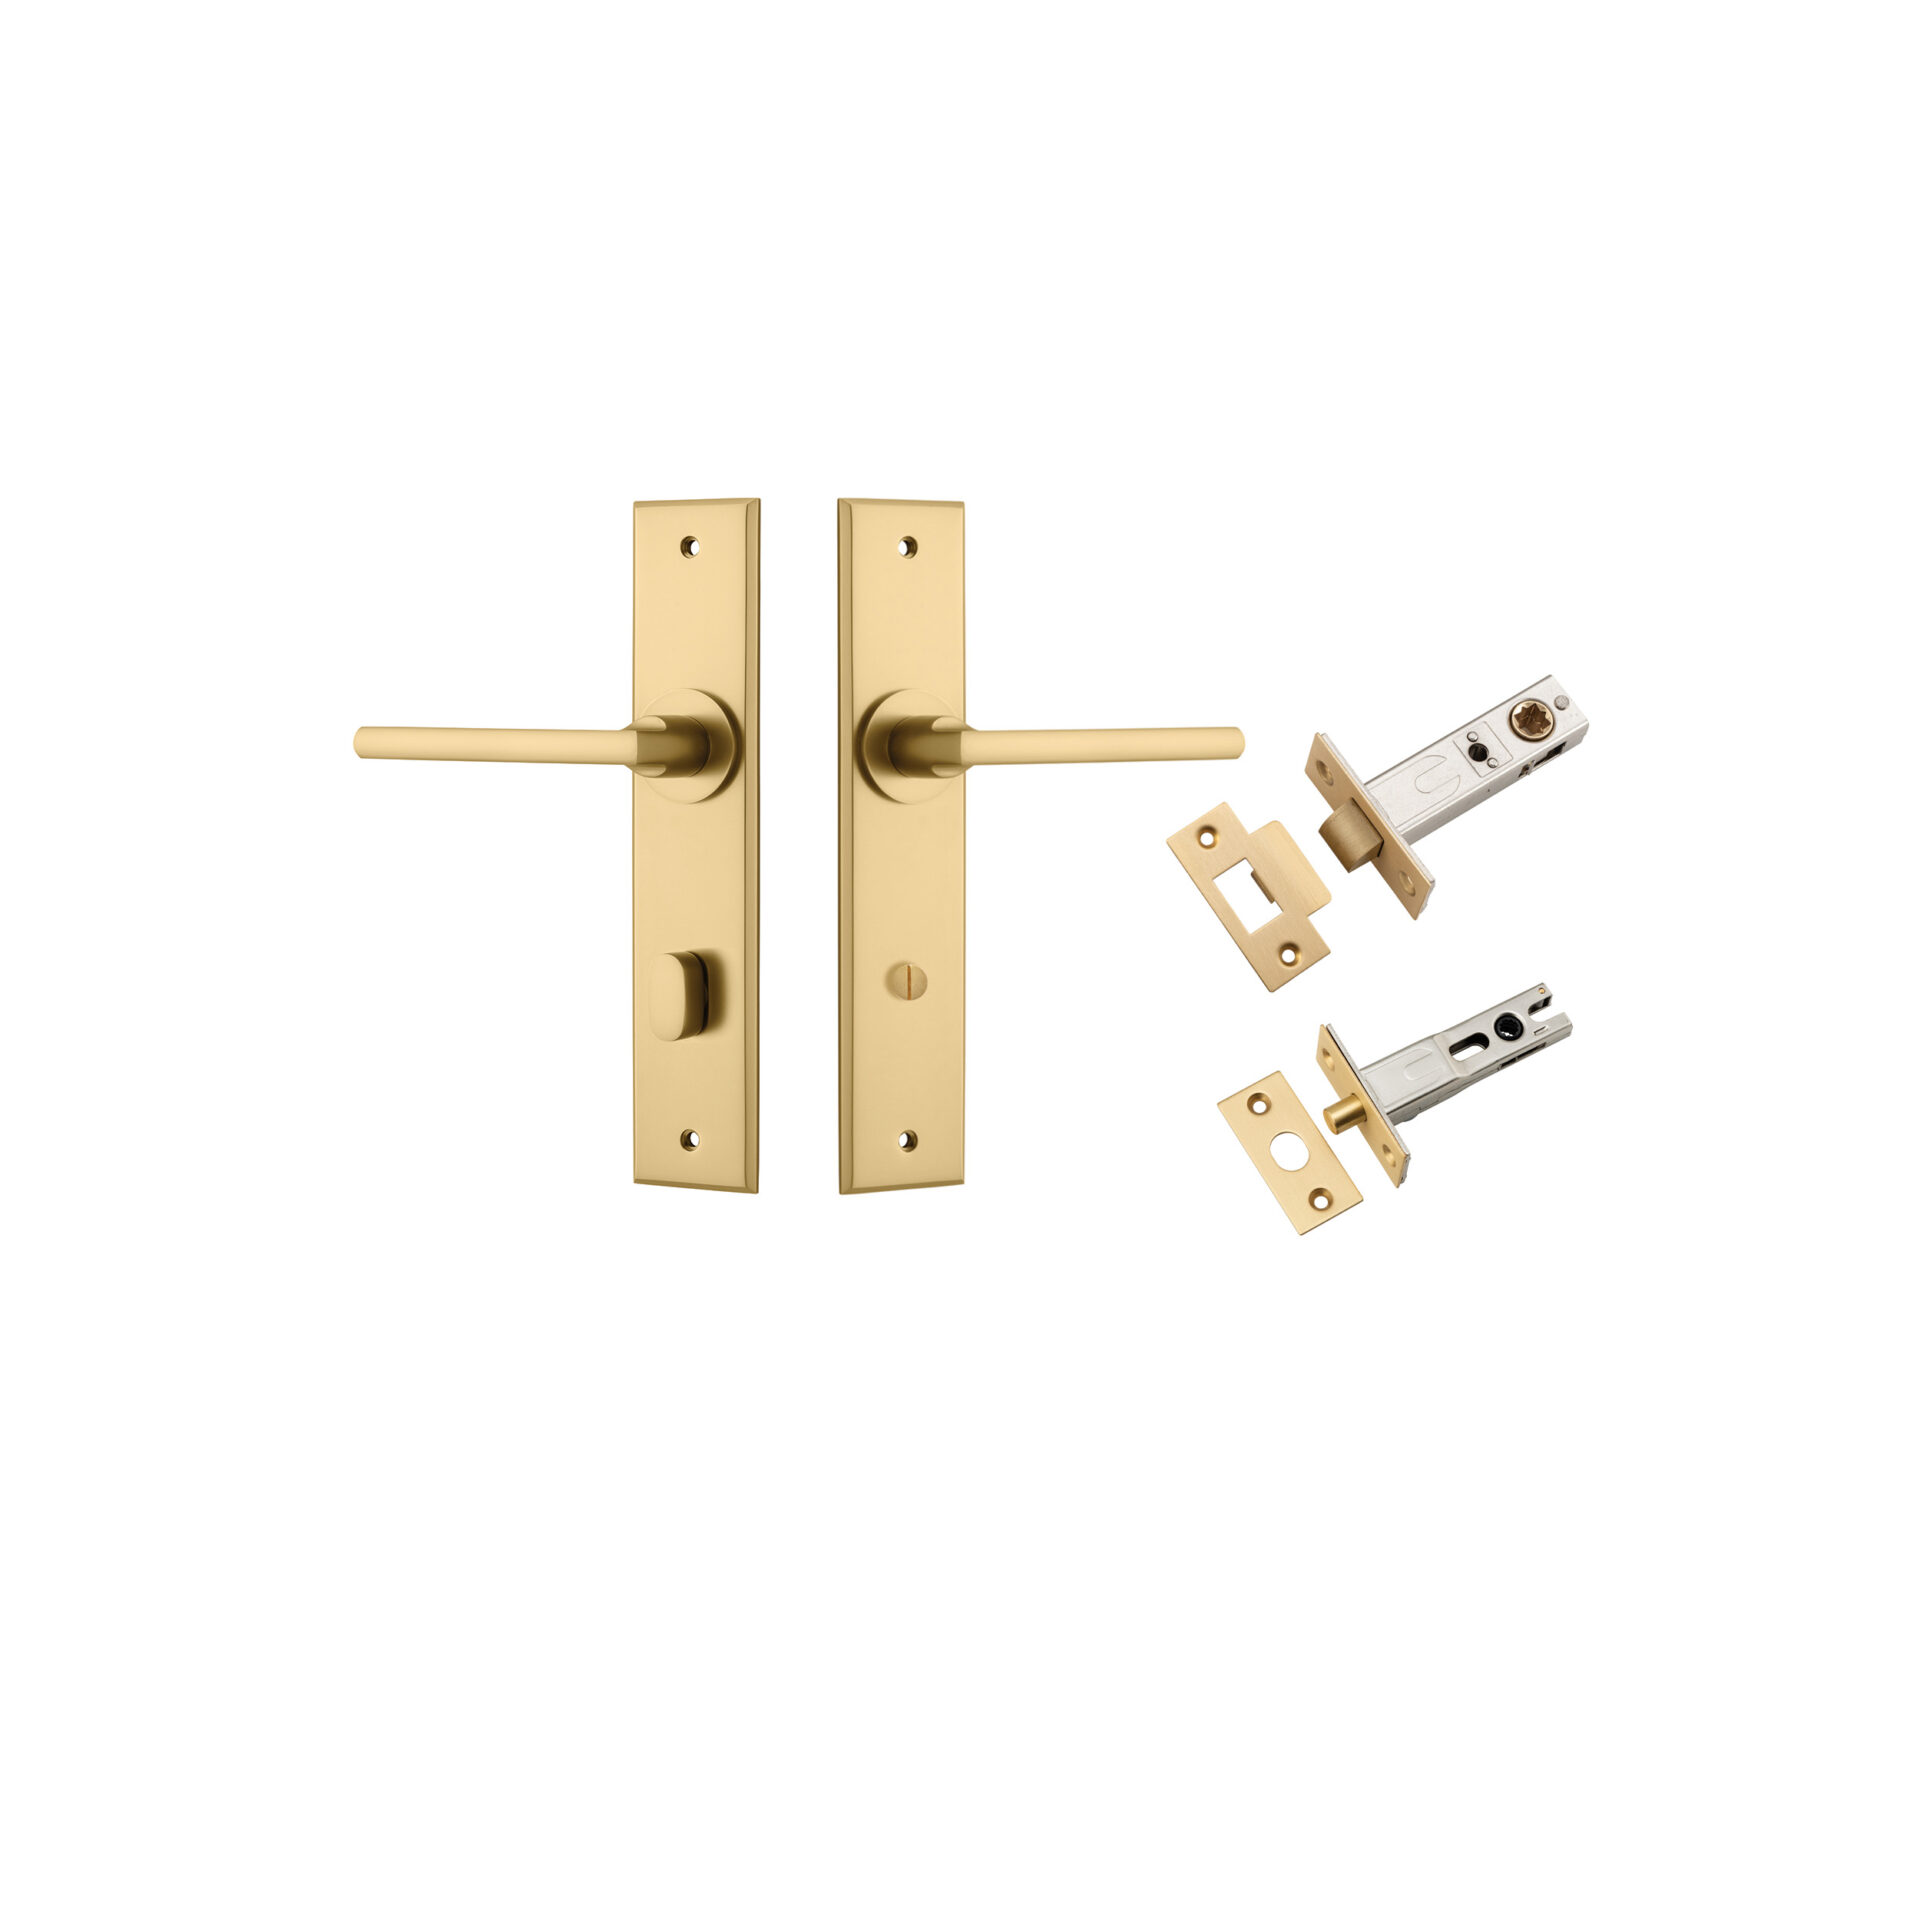 15282KPRIV60 - Baltimore Lever - Chamfered Backplate Privacy Kit with Privacy Turn - Brushed Brass - Privacy